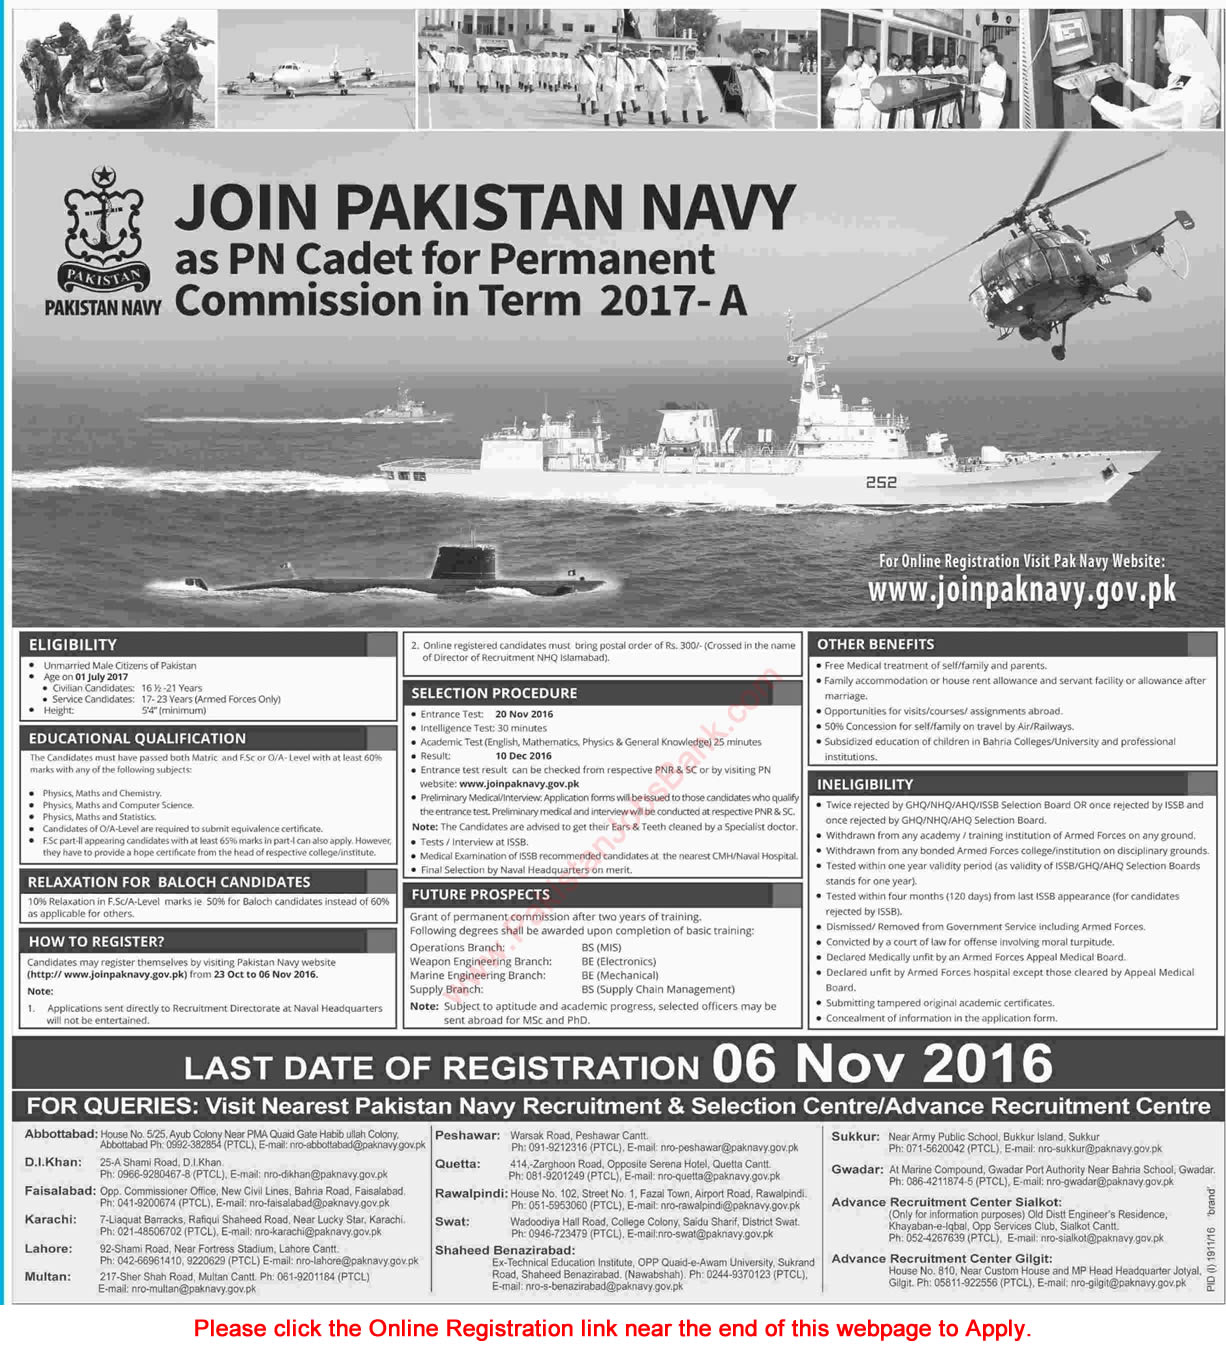 Join Pakistan Navy as PN Cadet October 2016 Online Registration for Permanent Commission in Term 2017-A Latest